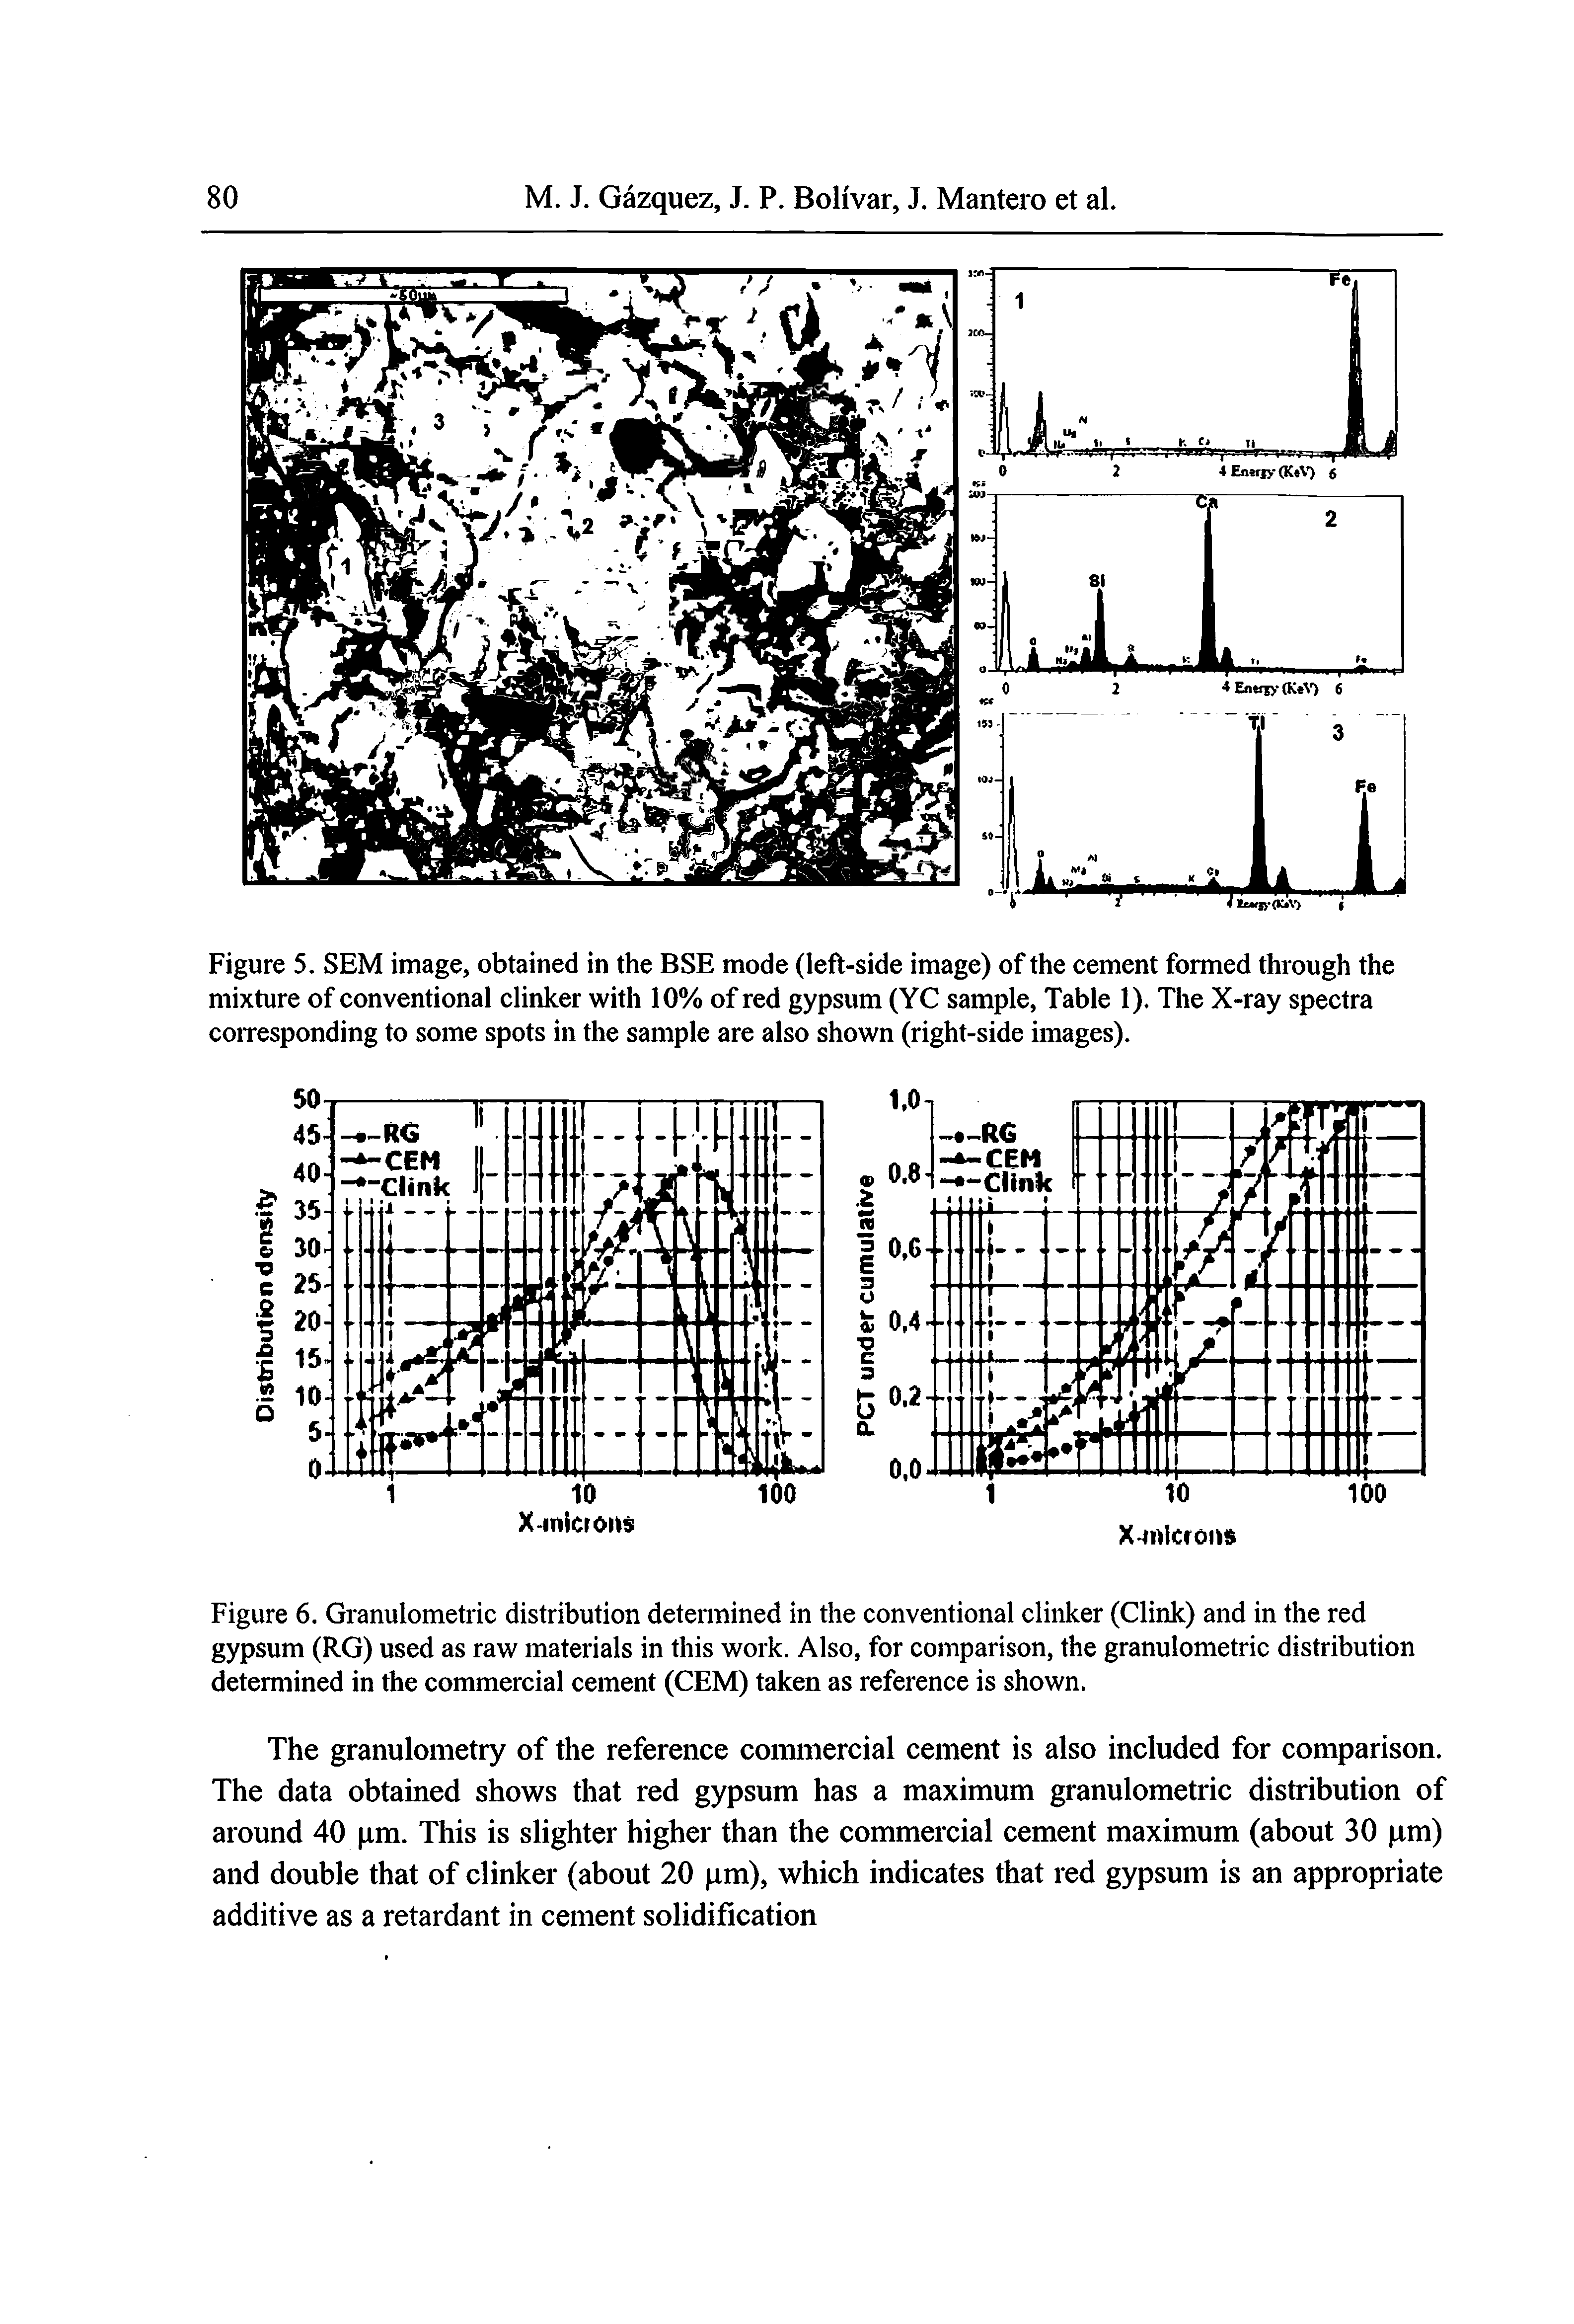 Figure 6. Granulometric distribution detemiined in the conventional clinker (Clink) and in the red gypsum (RG) used as raw materials in this work. Also, for comparison, the granulometric distribution detemiined in the commercial cement (CEM) taken as reference is shown.